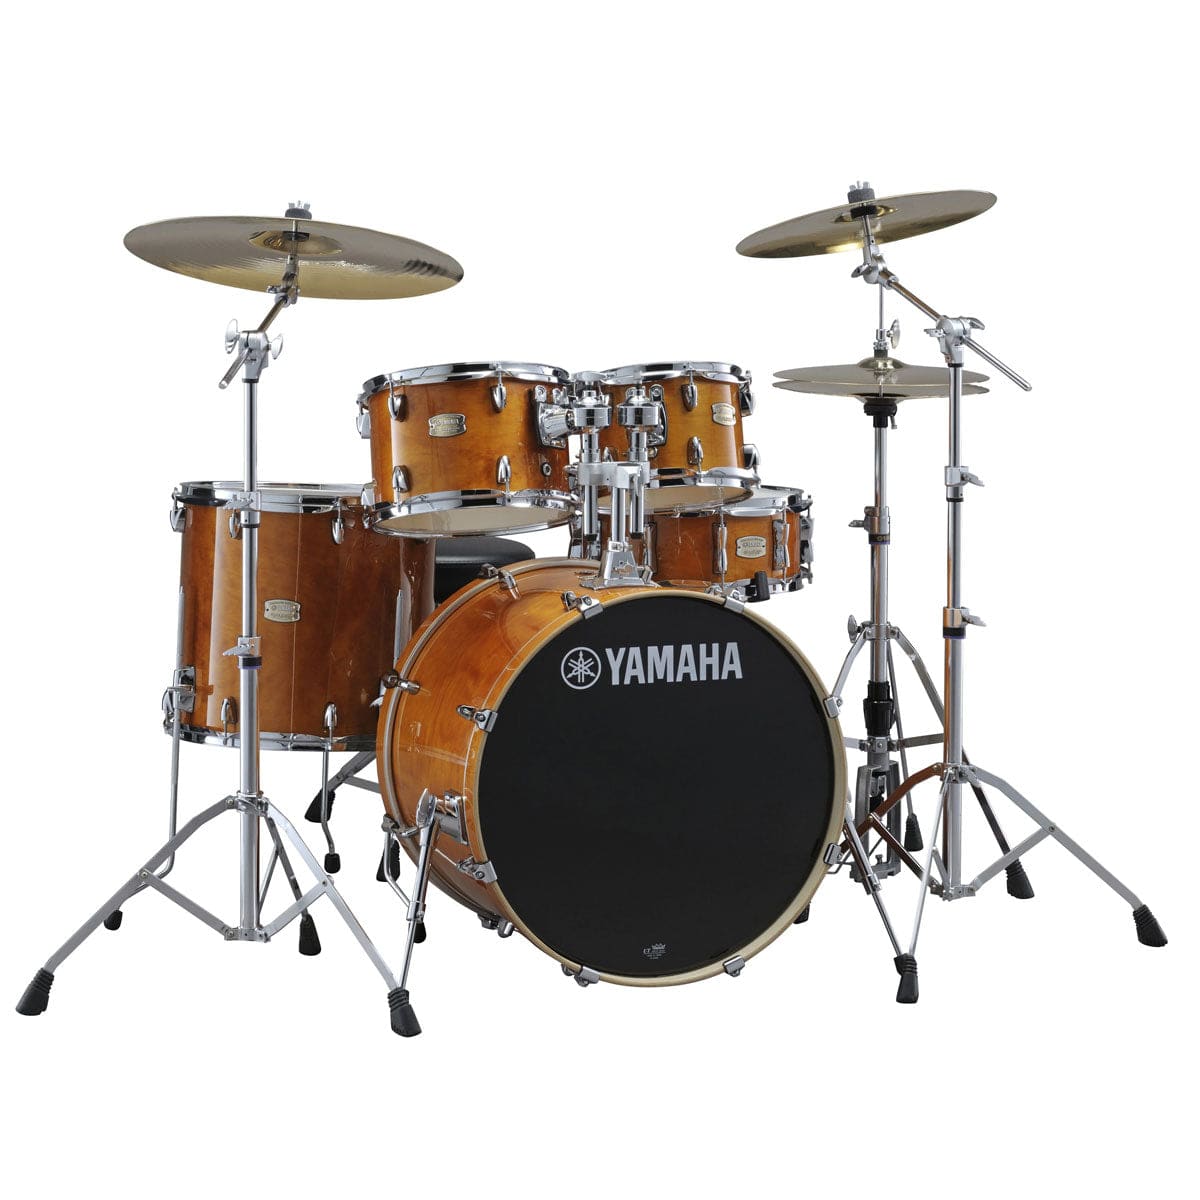 Yamaha Home Page YAMAHA STAGE CUSTOM BIRCH EURO KIT IN HONEY AMBER WITH PST5 CYMBALS - Byron Music